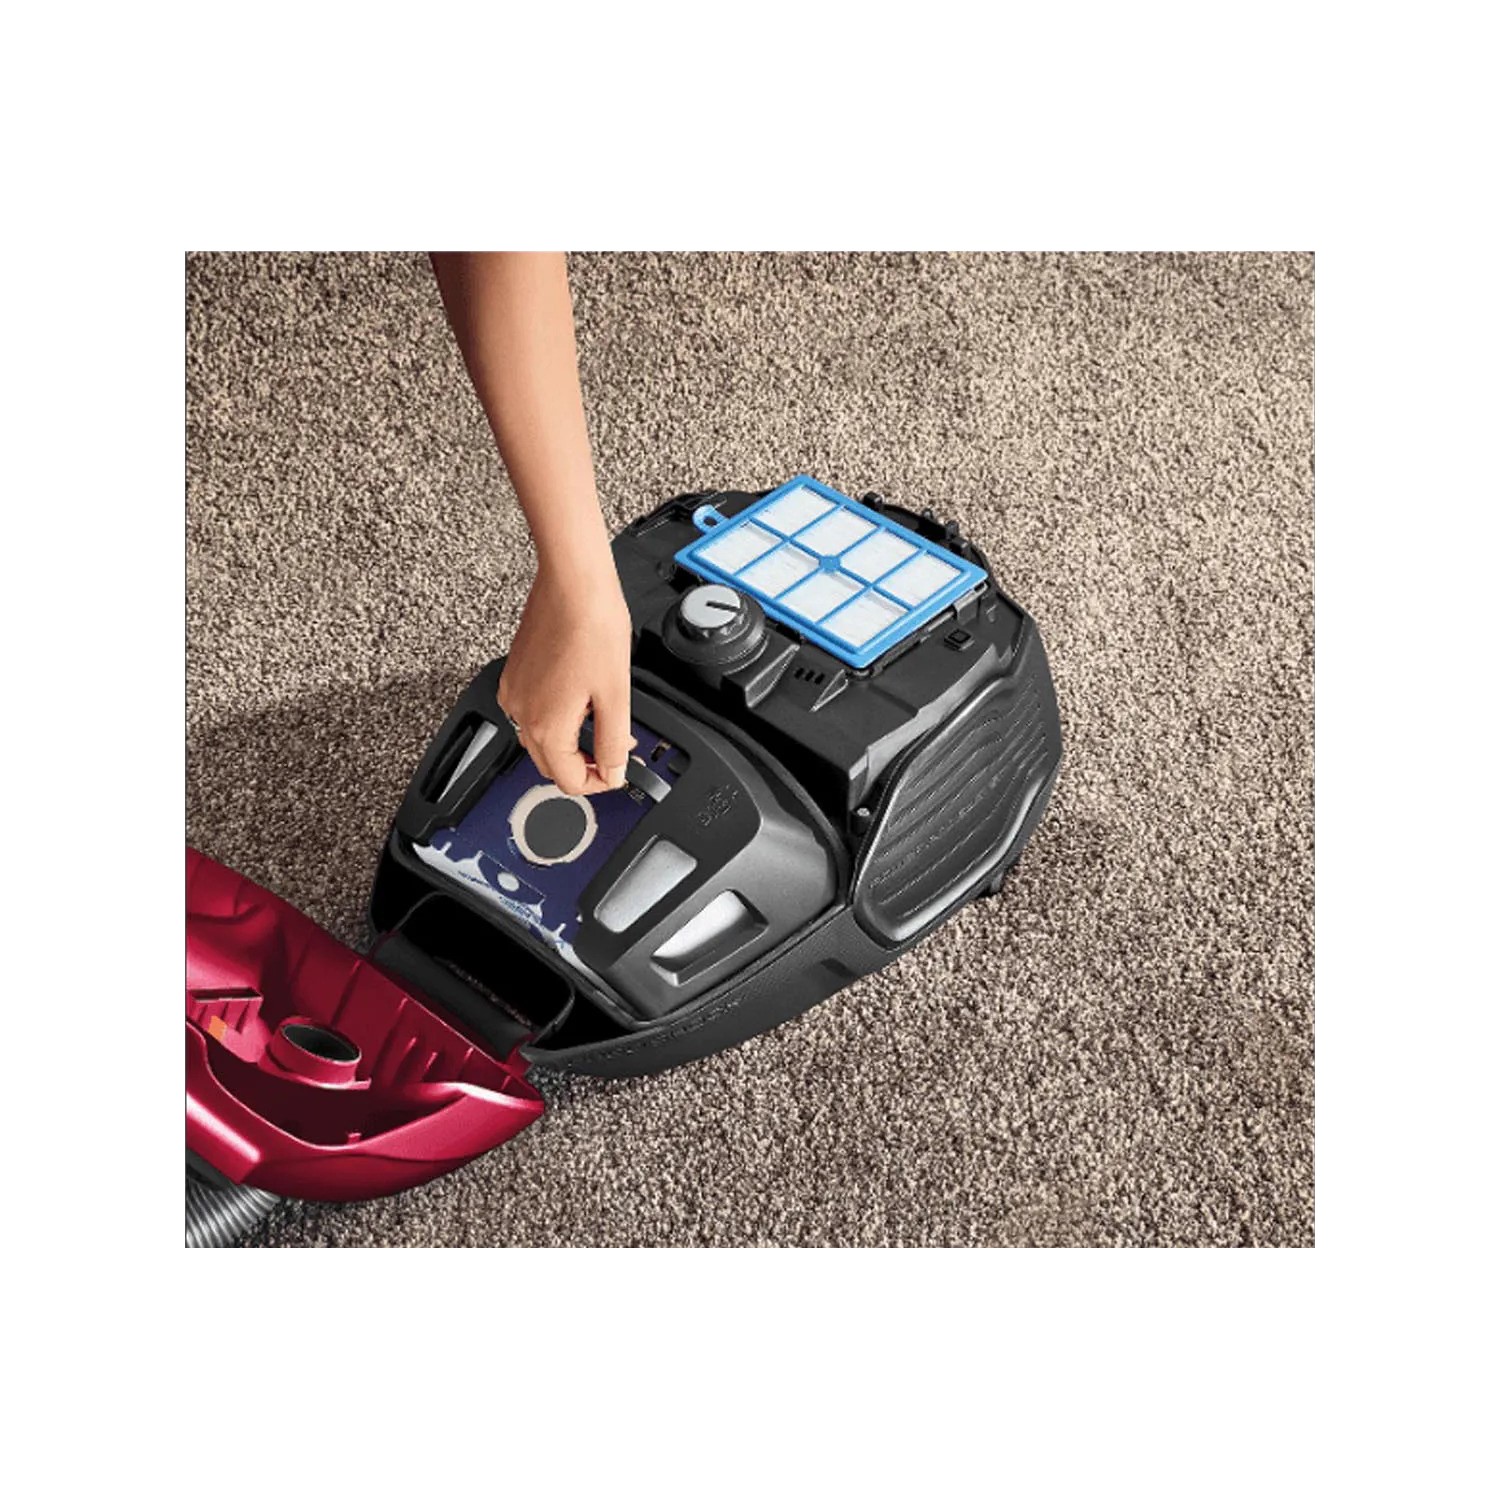 AEG VX6-2-RR Power Force All Floor Cylinder Vacuum Cleaner | Direct